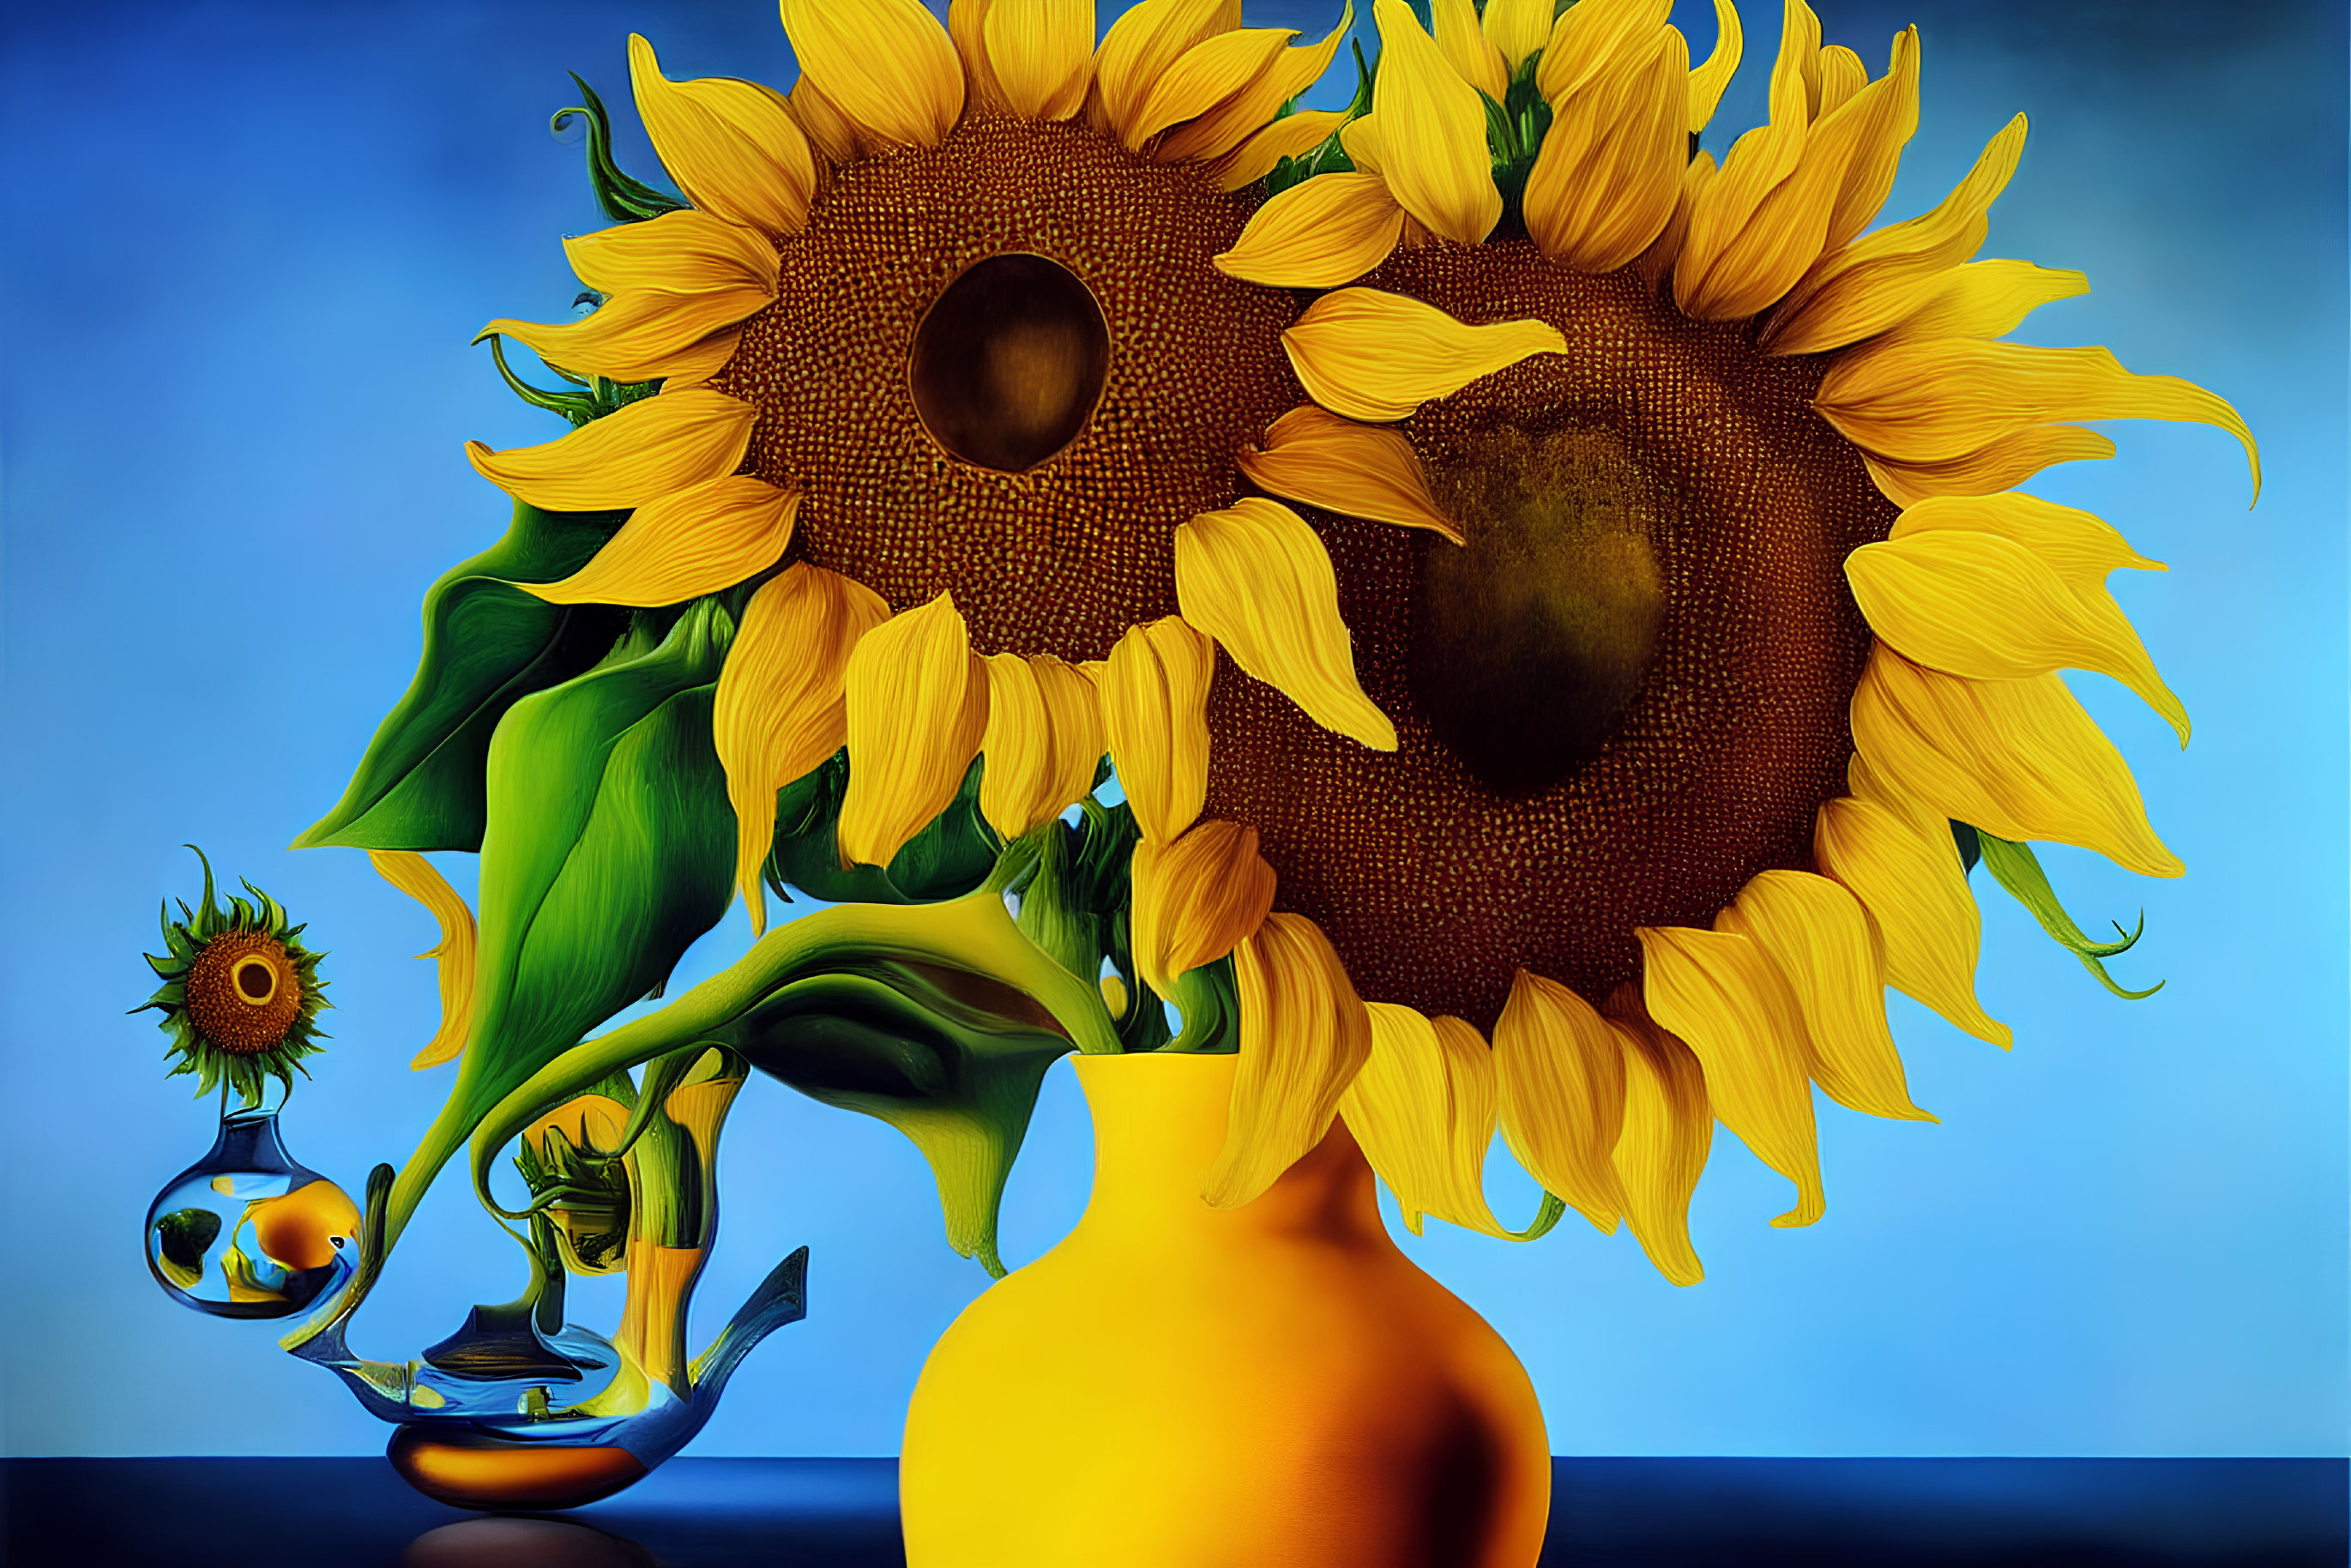 Surrealistic painting of oversized sunflowers and fish on blue gradient.